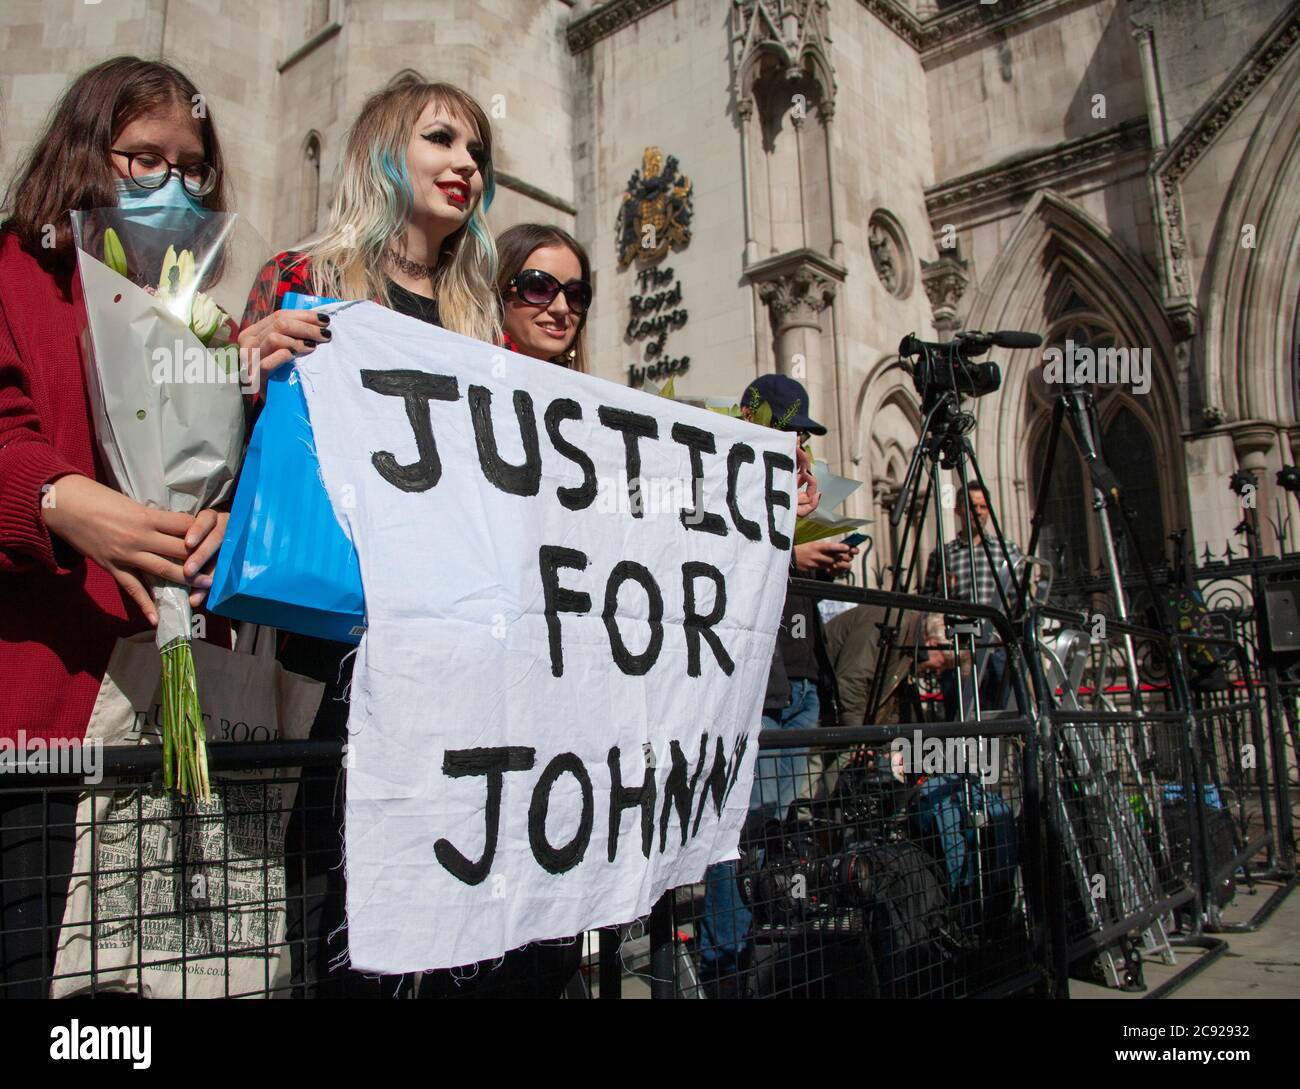 London, UK. 28th July 2020. Johnny Depp fan, Charlotte Pitson, holds up a ‘JUSTICE FOR JOHNNY’ banner, outside The Royal Courts of Justice, on the last day (16) of the actors libel trial against The Sun's publishers NGN. Credit: Neil Atkinson/Alamy Live News Stock Photo